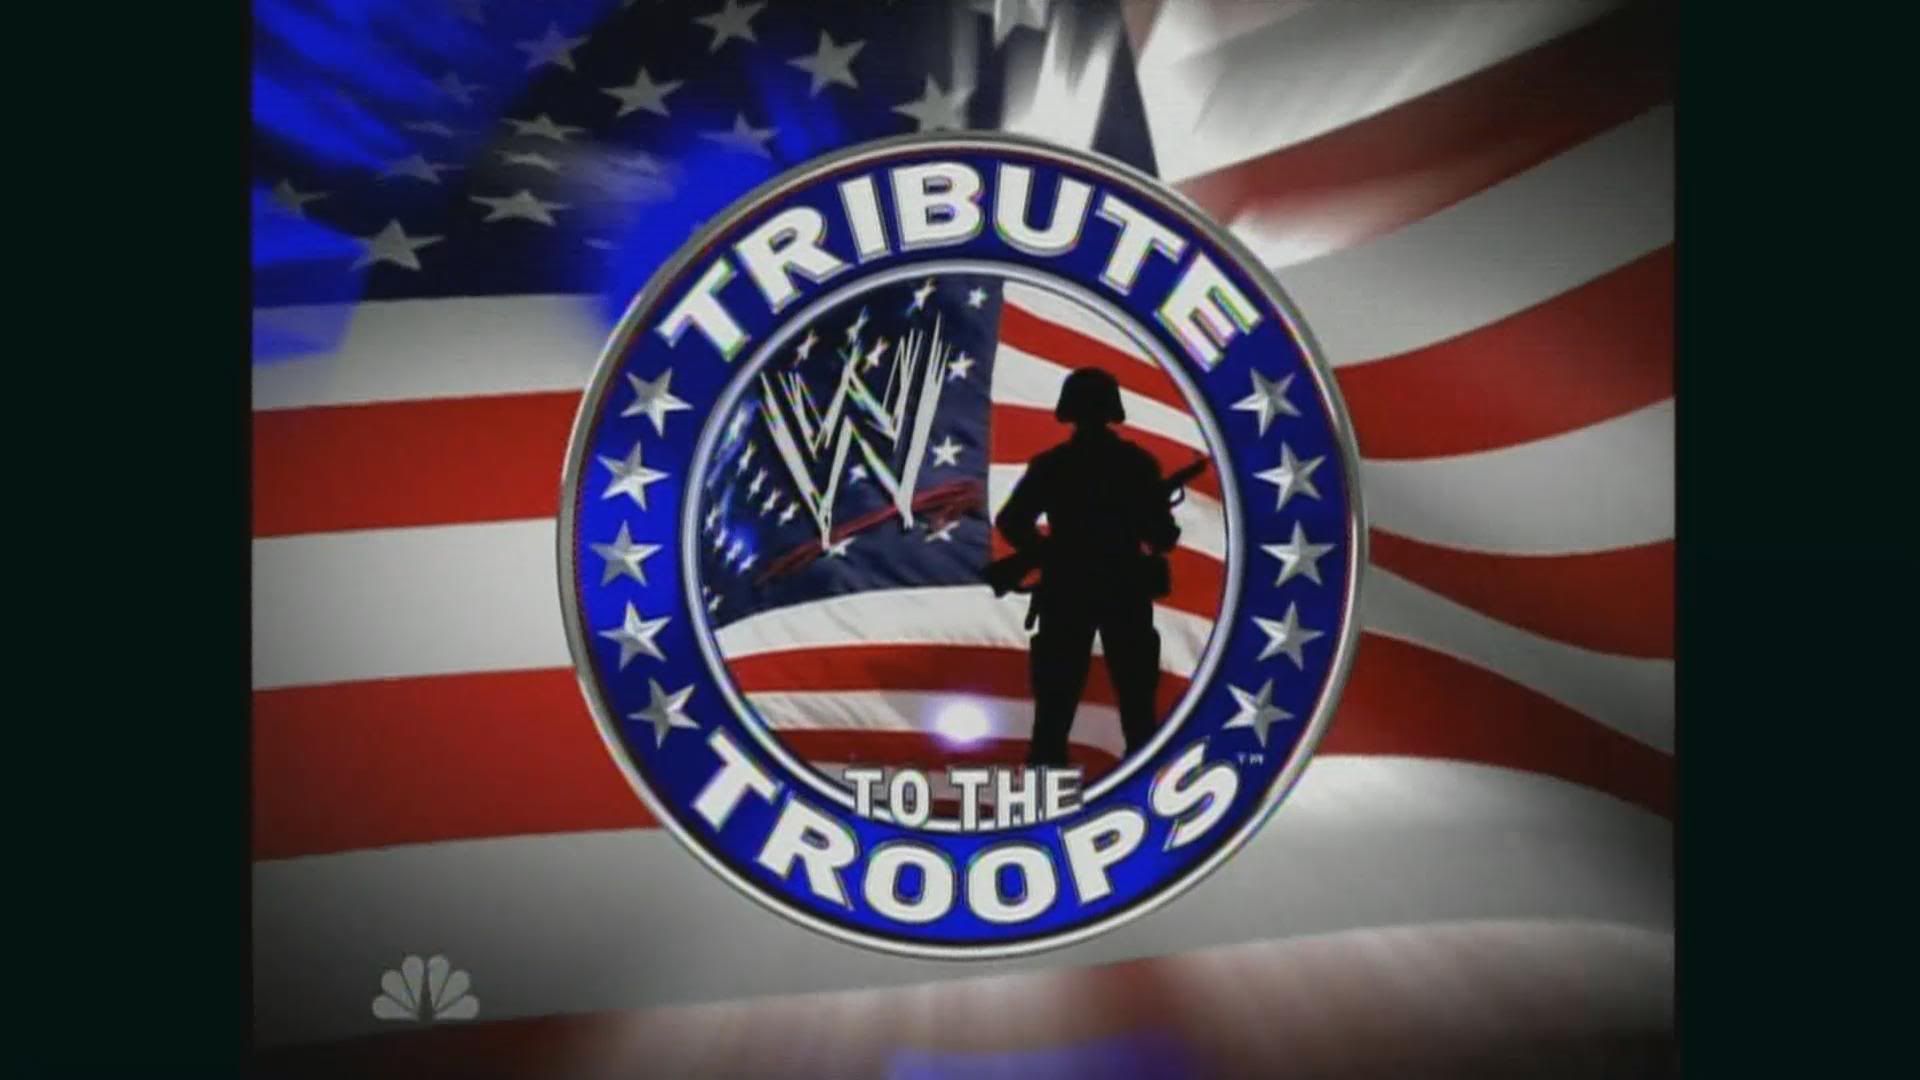 WWE Tribute to the Troops HDTV 1080p 2008 12 20 MP4 SC SDH preview 0